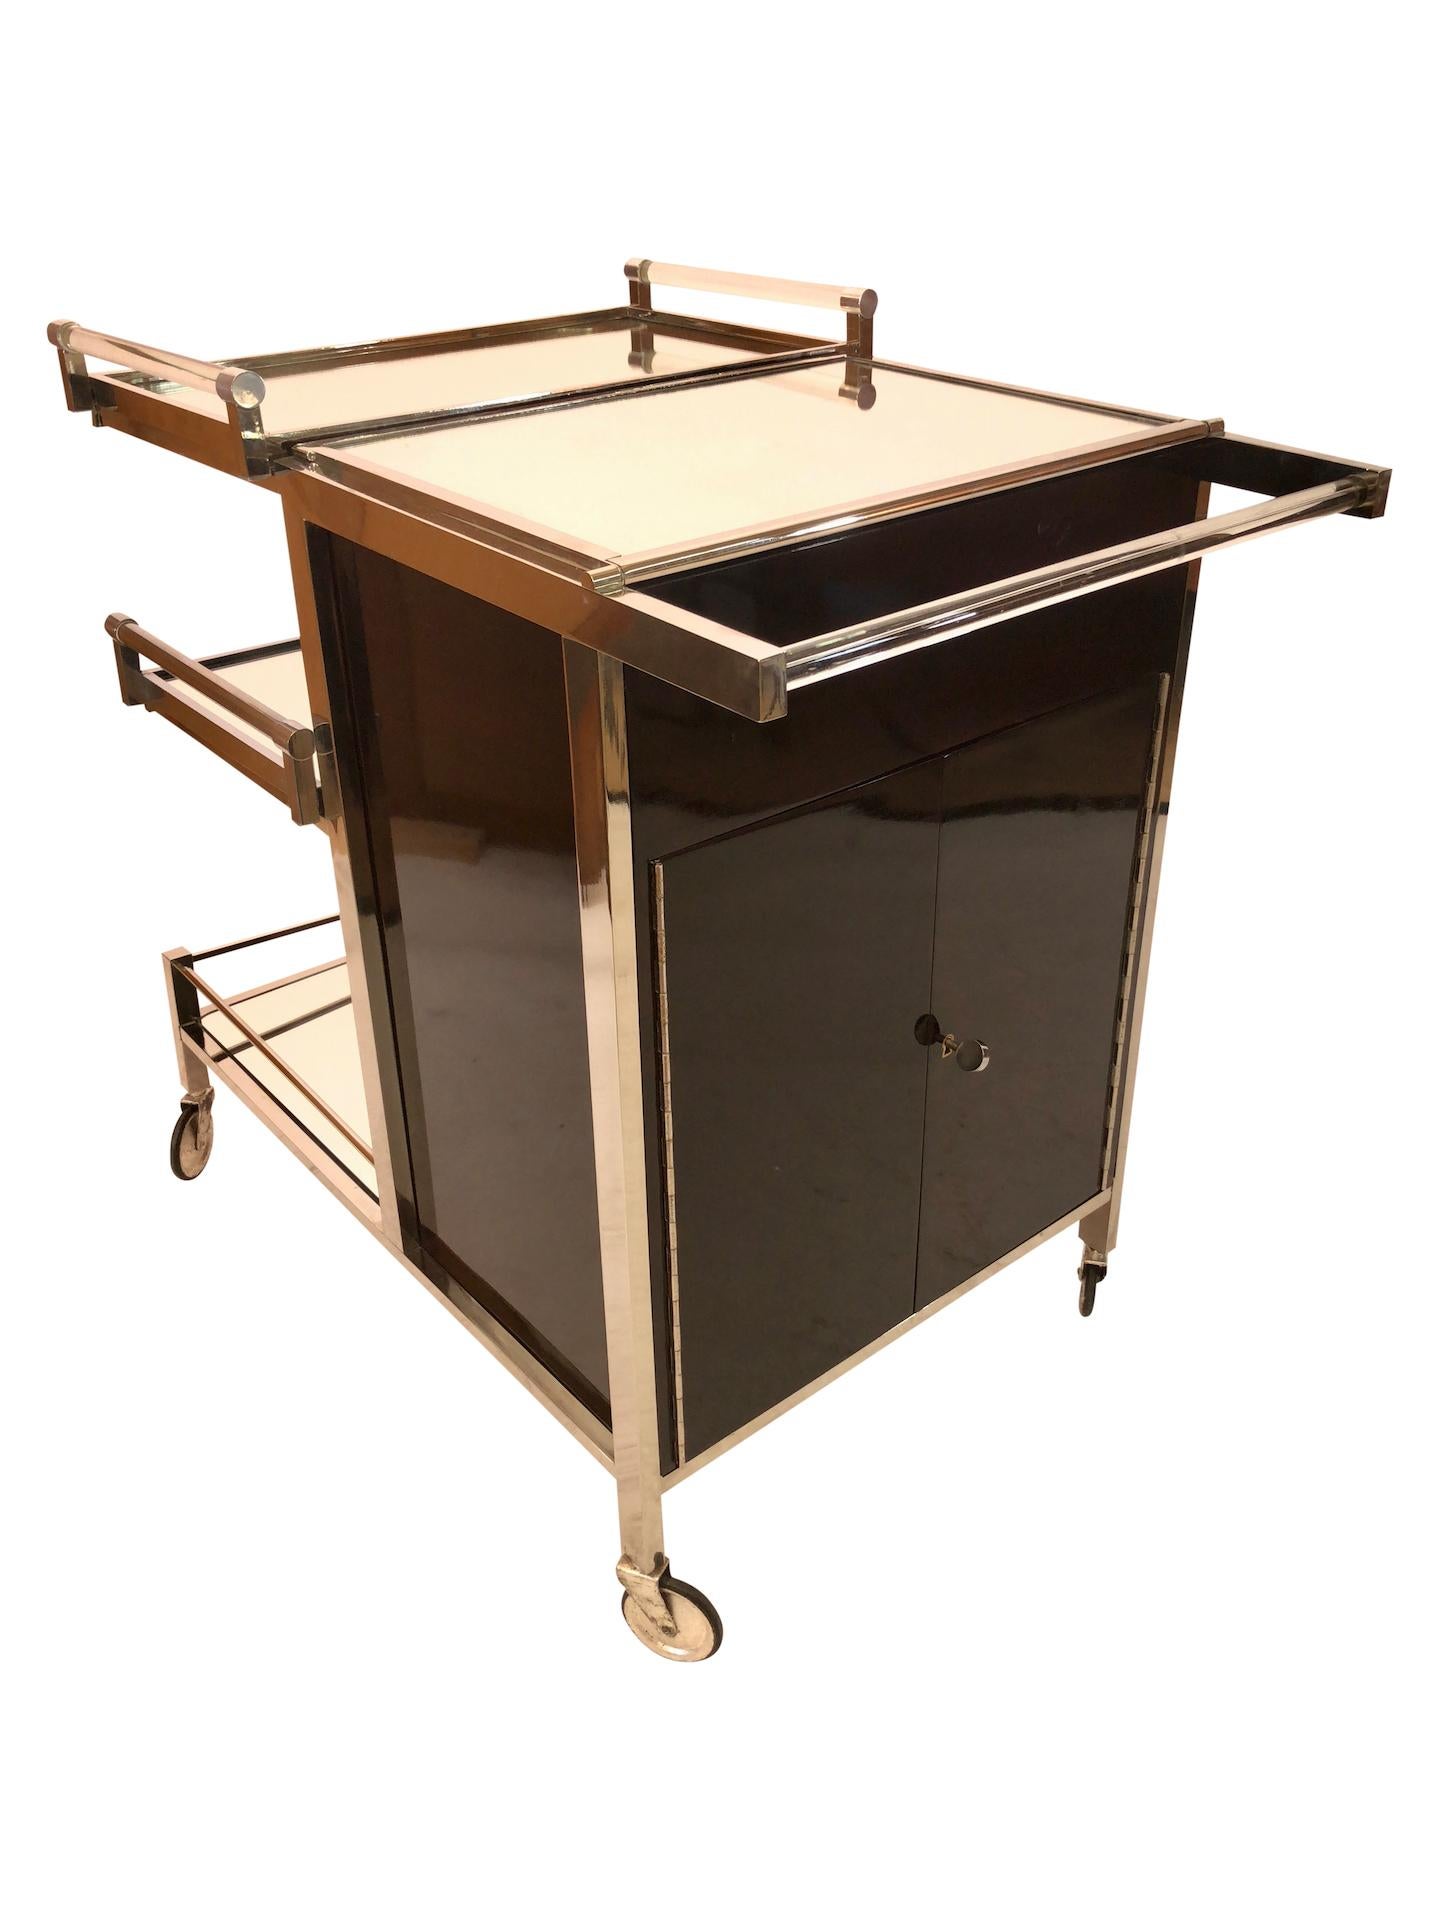 Art Deco bar cart or tea wagon
Original Jacques Adnet 
2 removable trays 
French Art Deco, 1930s 

Pictures take in a warm lighted ambience. 
Metal: brass is fresh nickeled or chromed! 
Real wood veneer (Mahagoni) 
Some mirrors has been